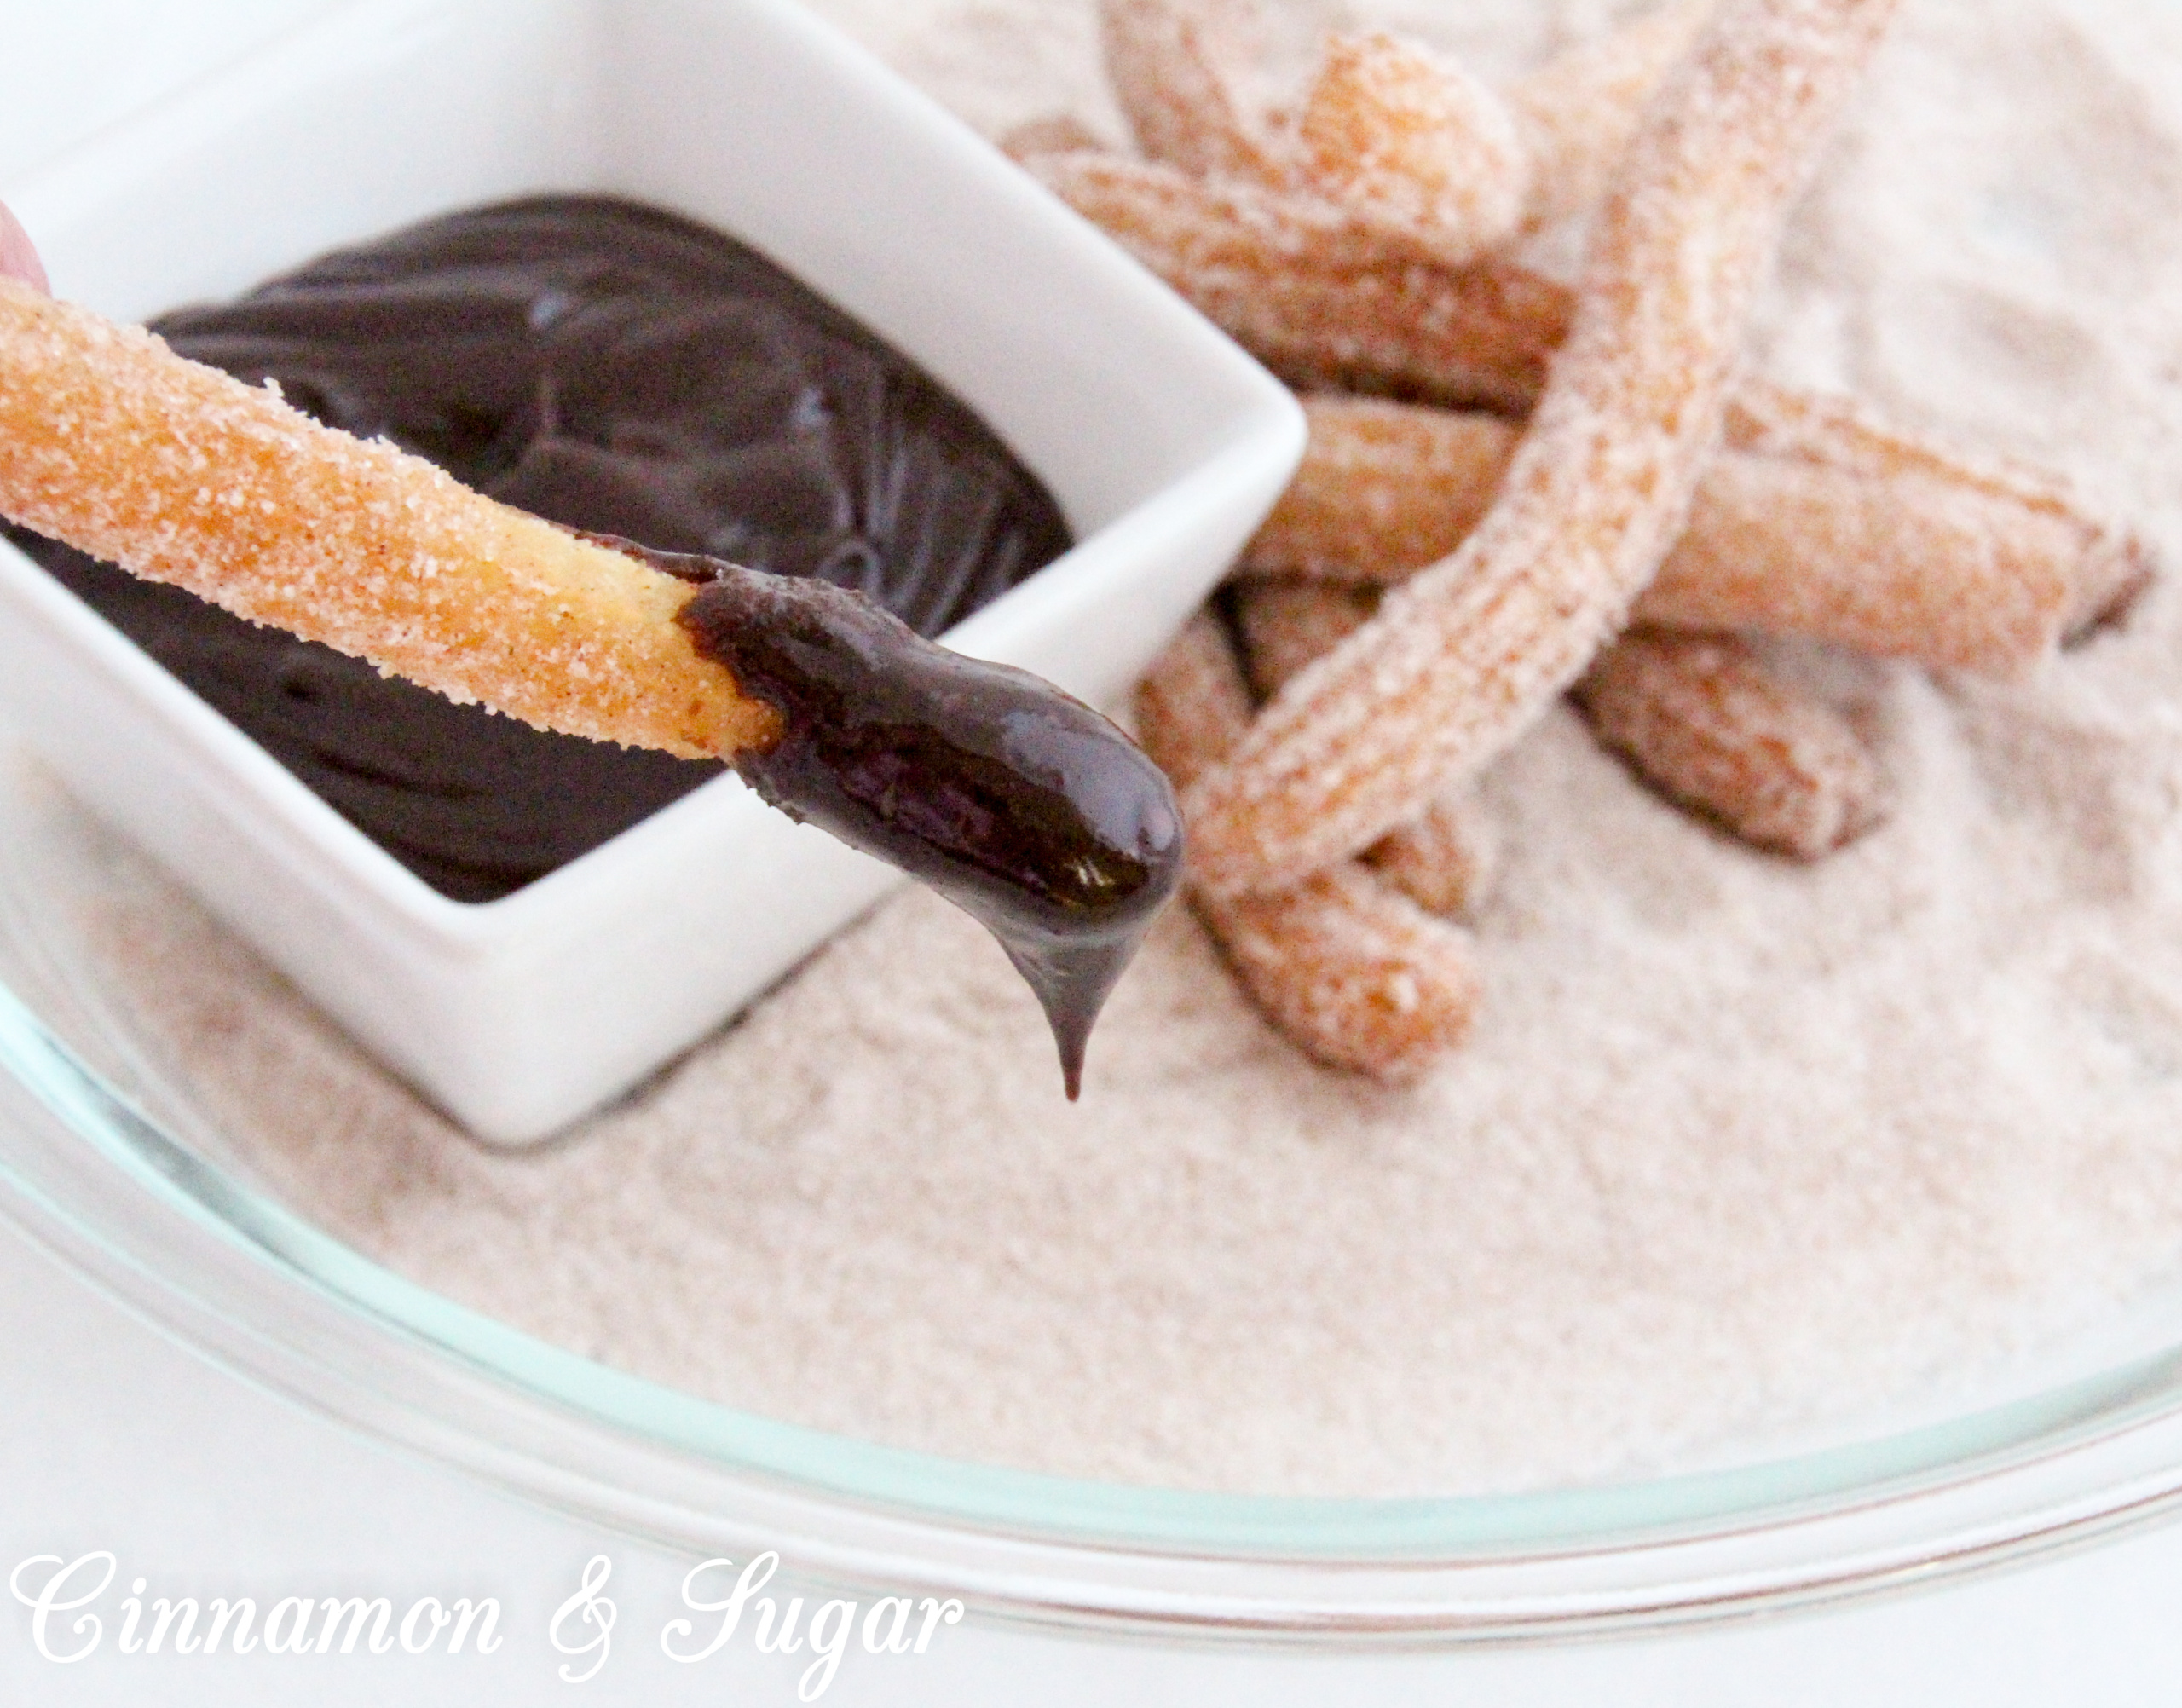 It's not that difficult to make fresh, hot from the skillet, churros. Rolled in cinnamon and sugar, and then served with warm Mexican chocolate dipping sauce, this dessert is a scrumptious treat! Recipe shared with permission granted by S.C. Perkins, author of LINEAGE MOST LETHAL. 